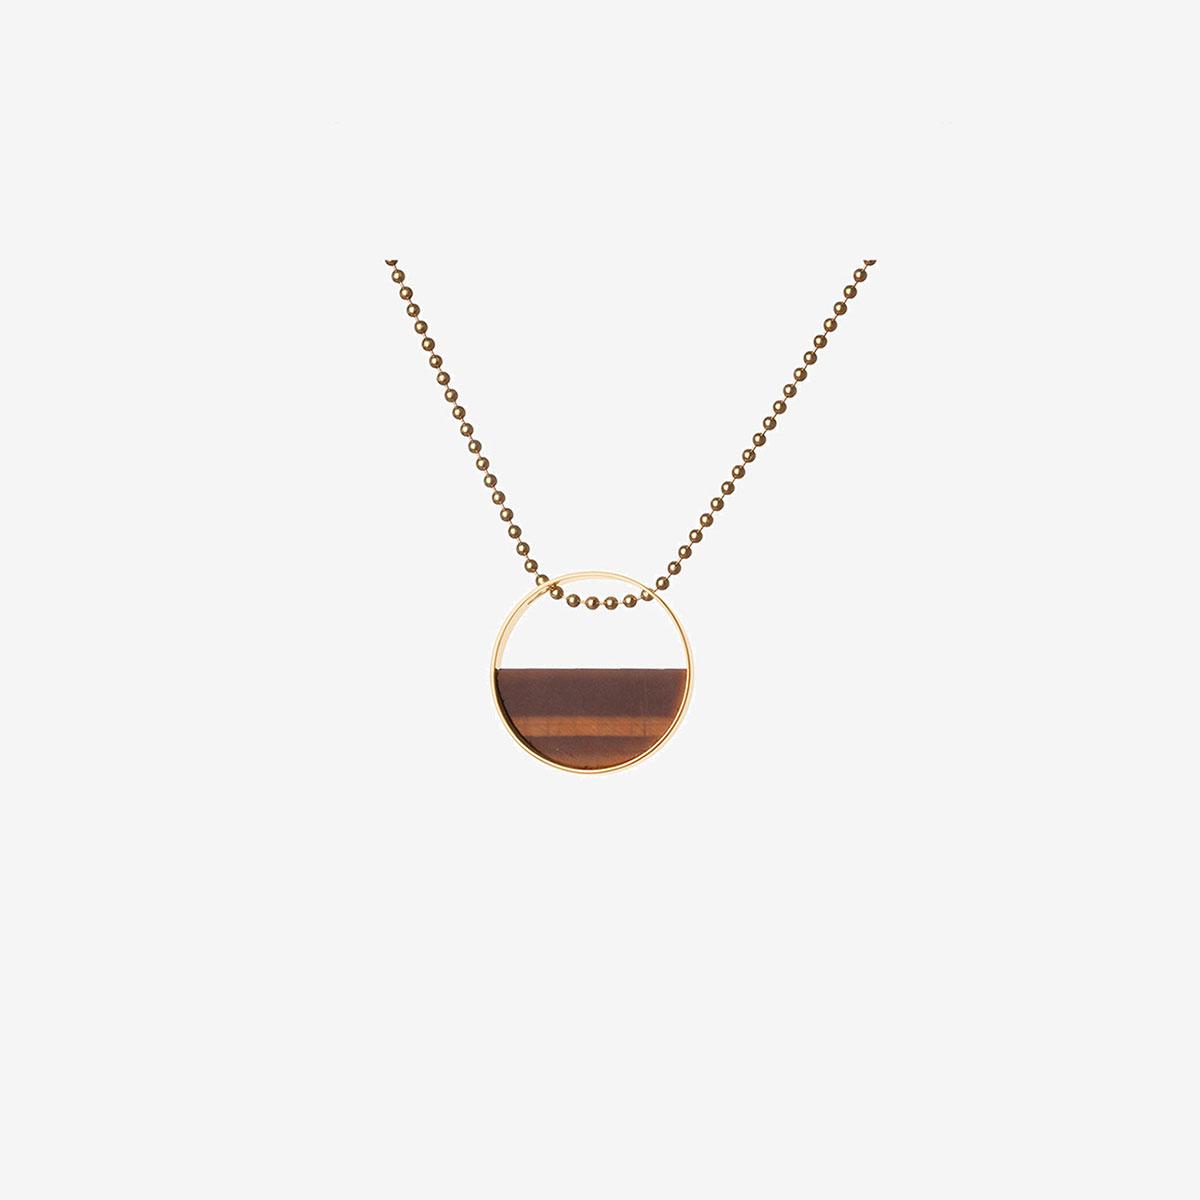 Ula handmade necklace in 9k or 18k gold, sterling silver and tiger eye designed by Belen Bajo